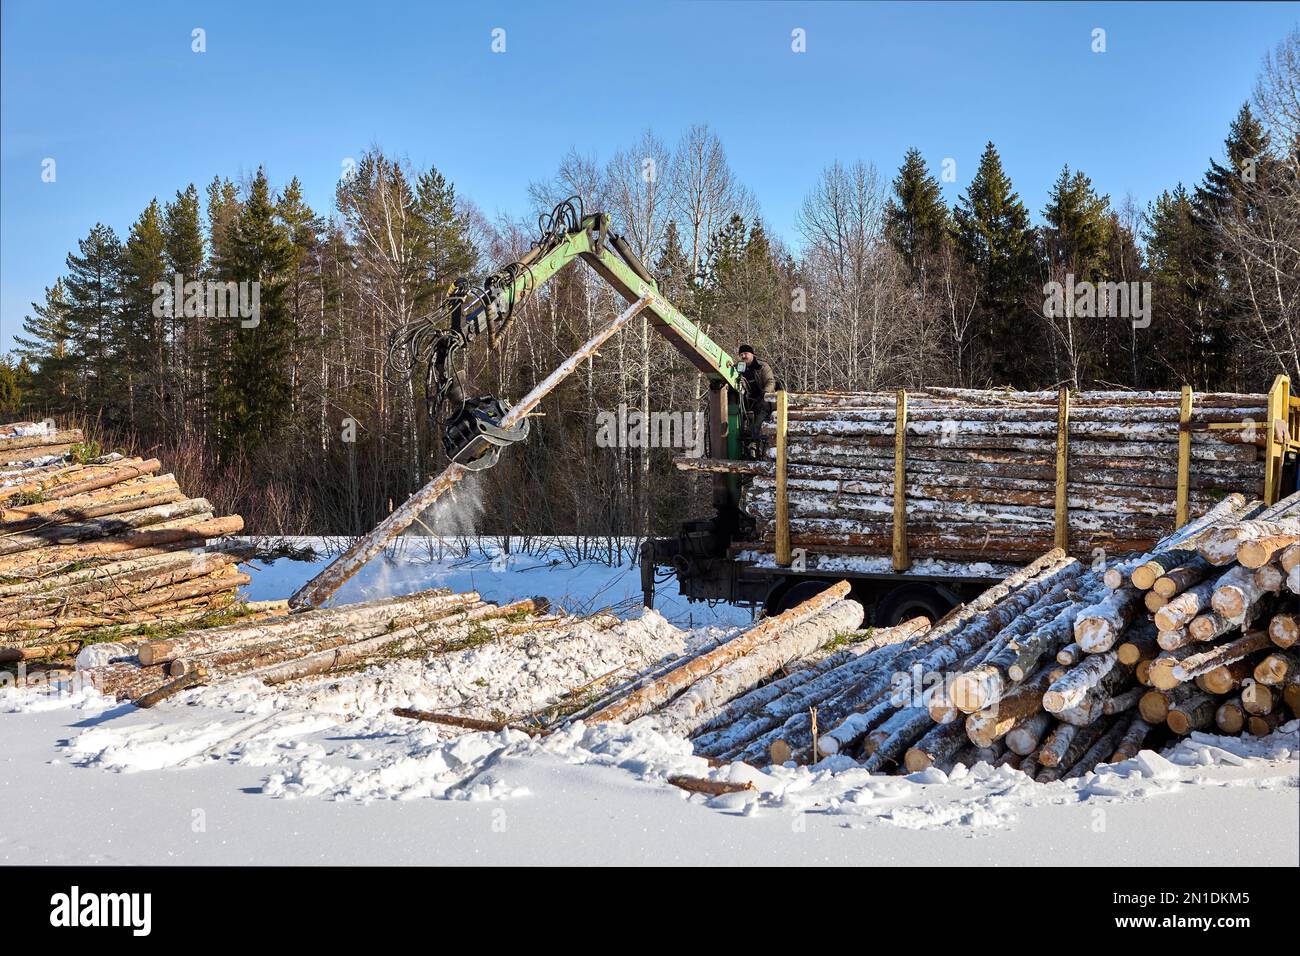 Stacked Birch Logs on Lumber Yard Photograph by Taina Sohlman